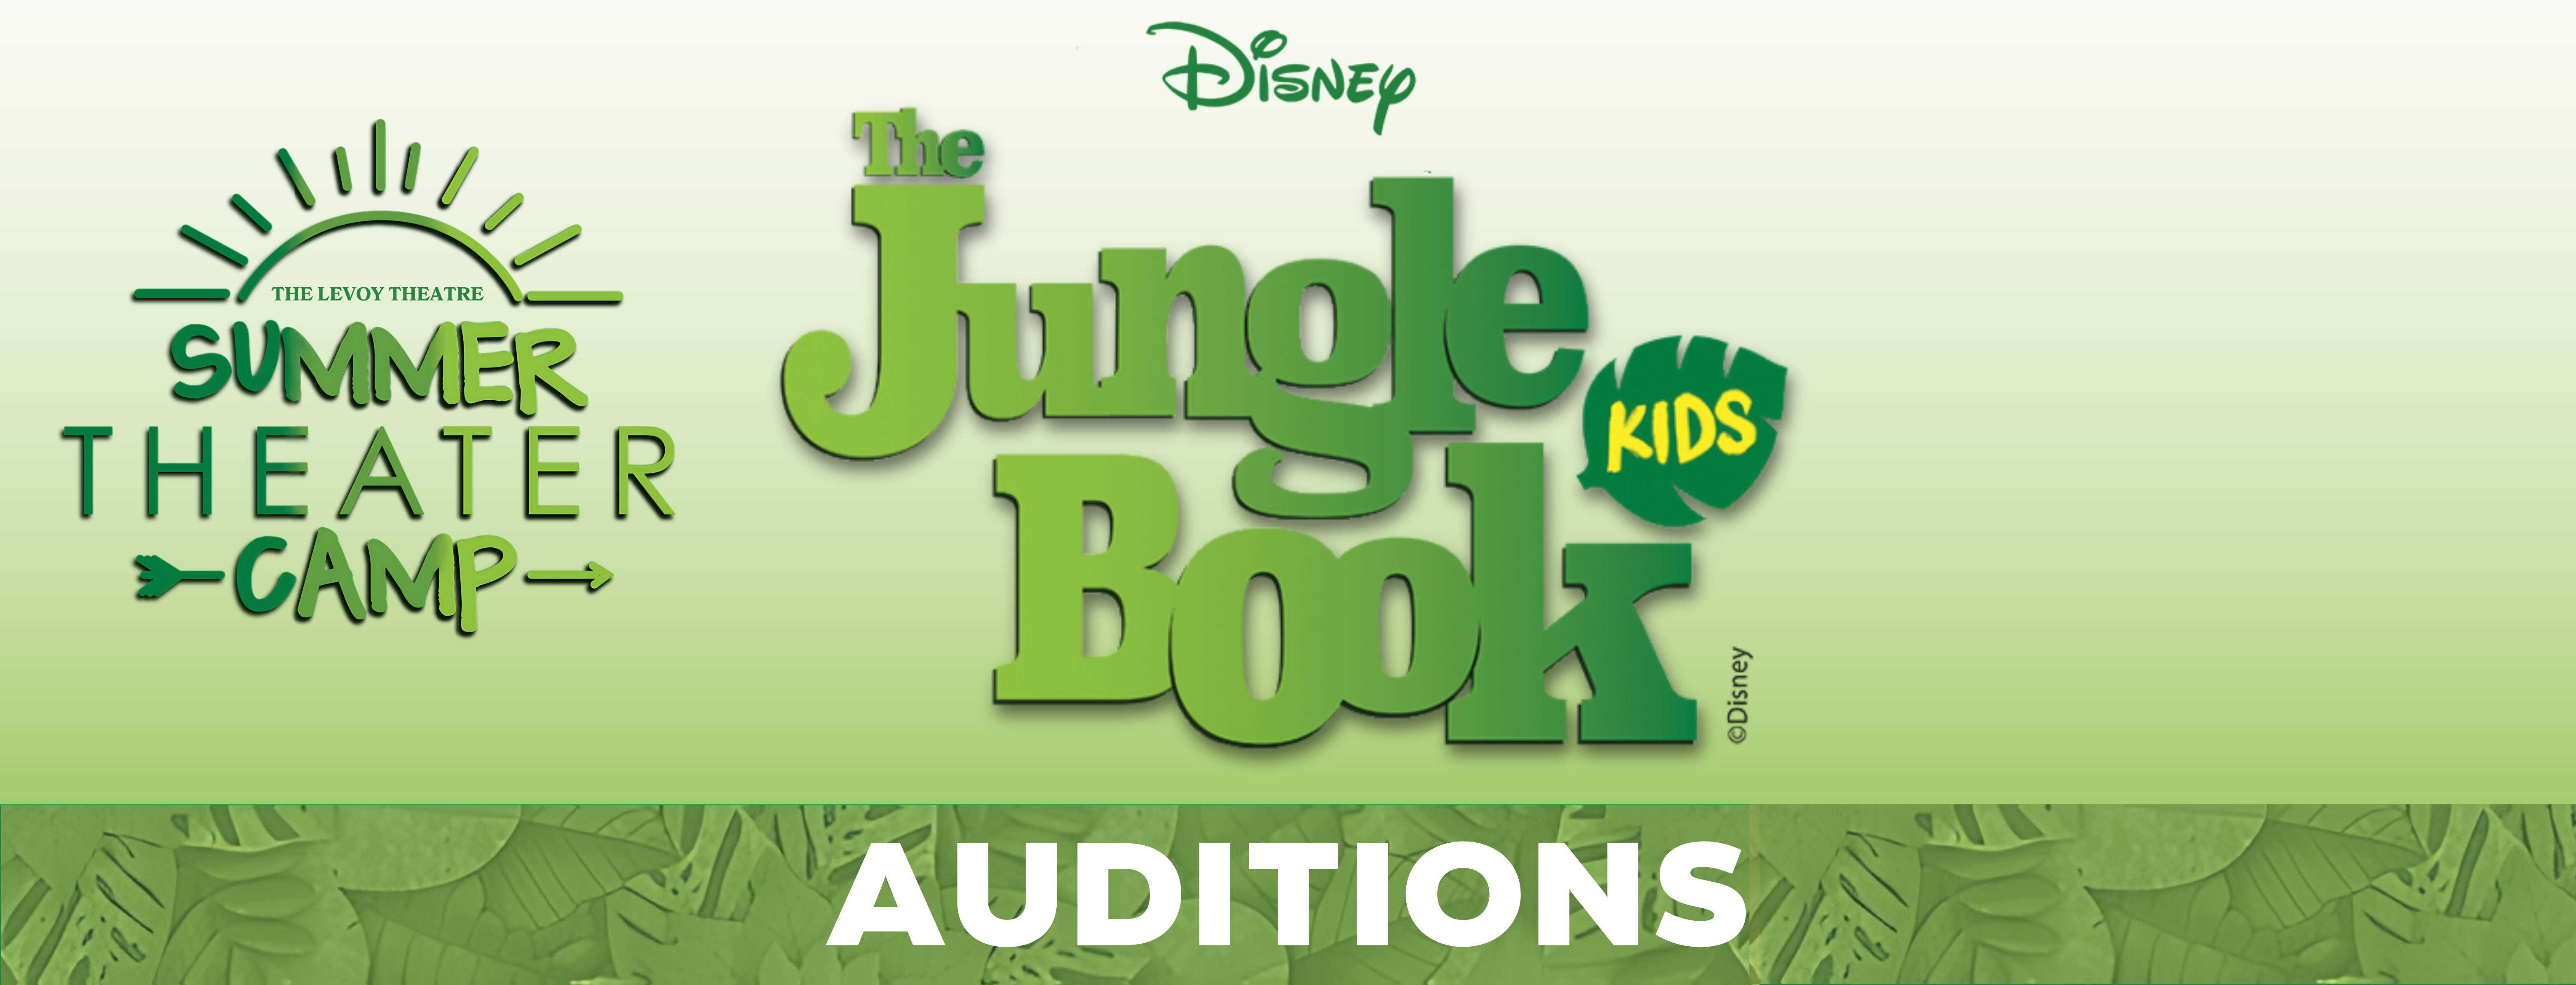 Jungle Book Kids Audition Header. Green text on faded green background. Levoy Theatre Summer Camp logo top right. White text bottom "Auditions"